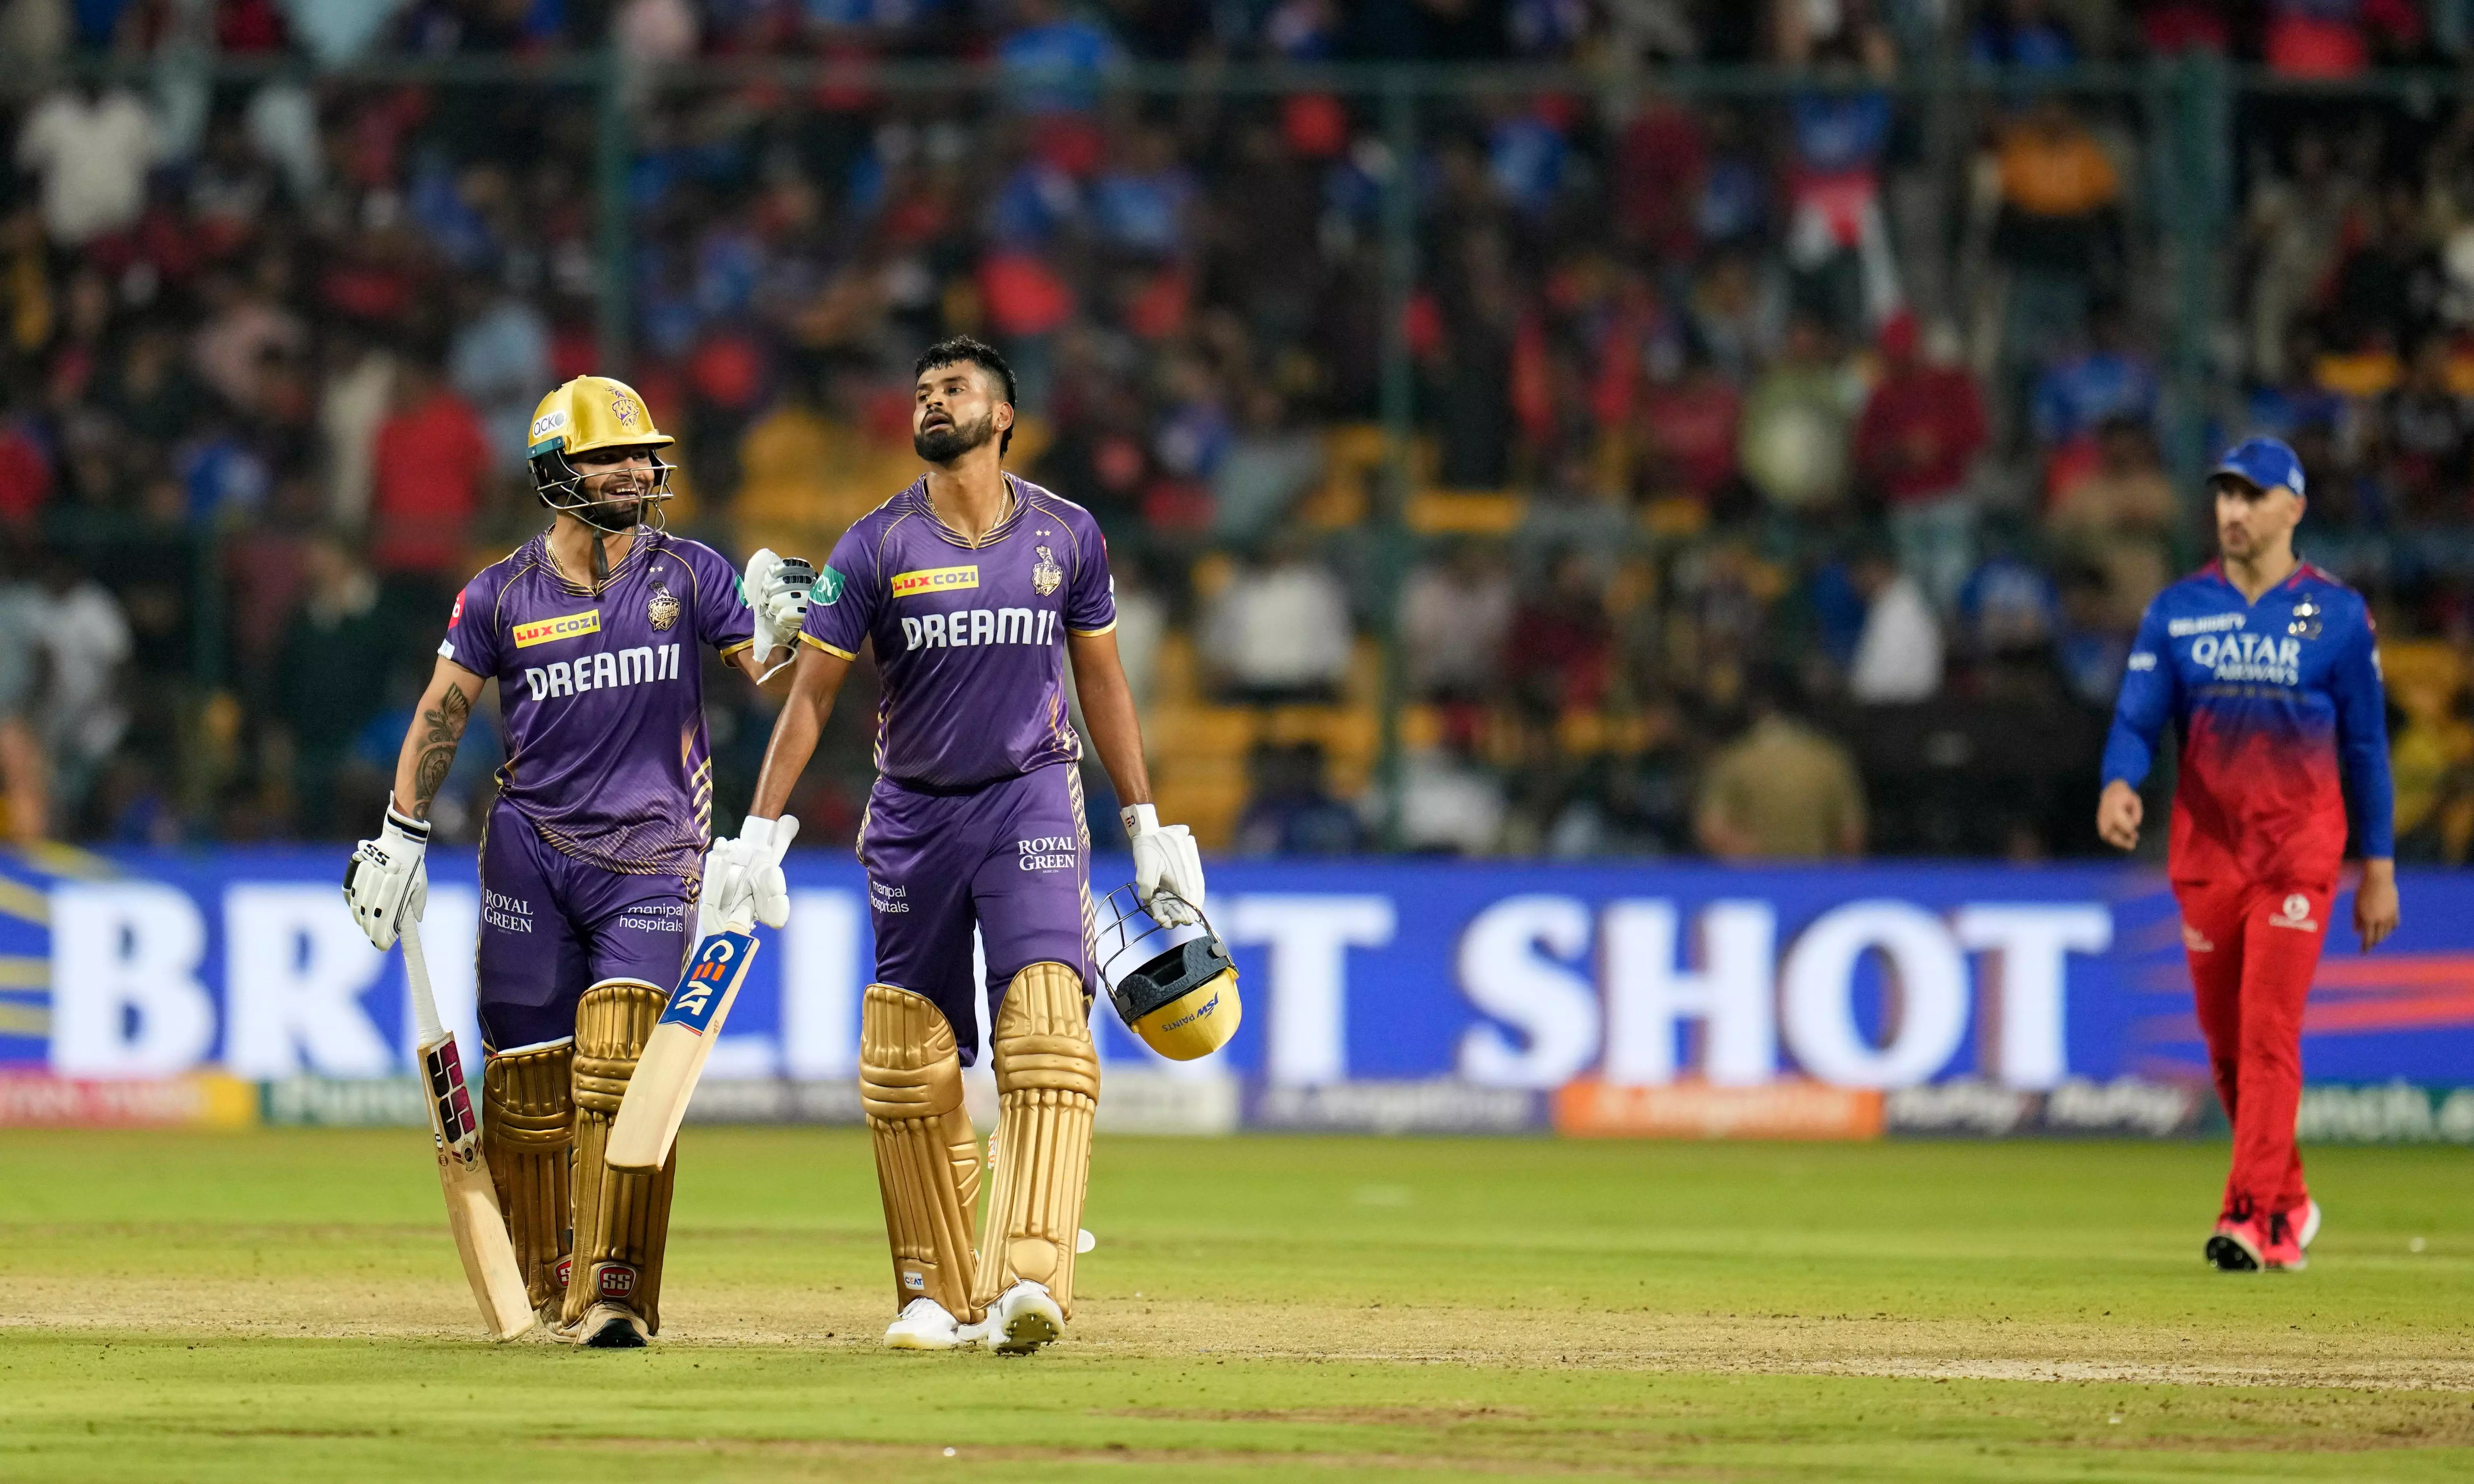 KKR beat RCB by 7 wickets